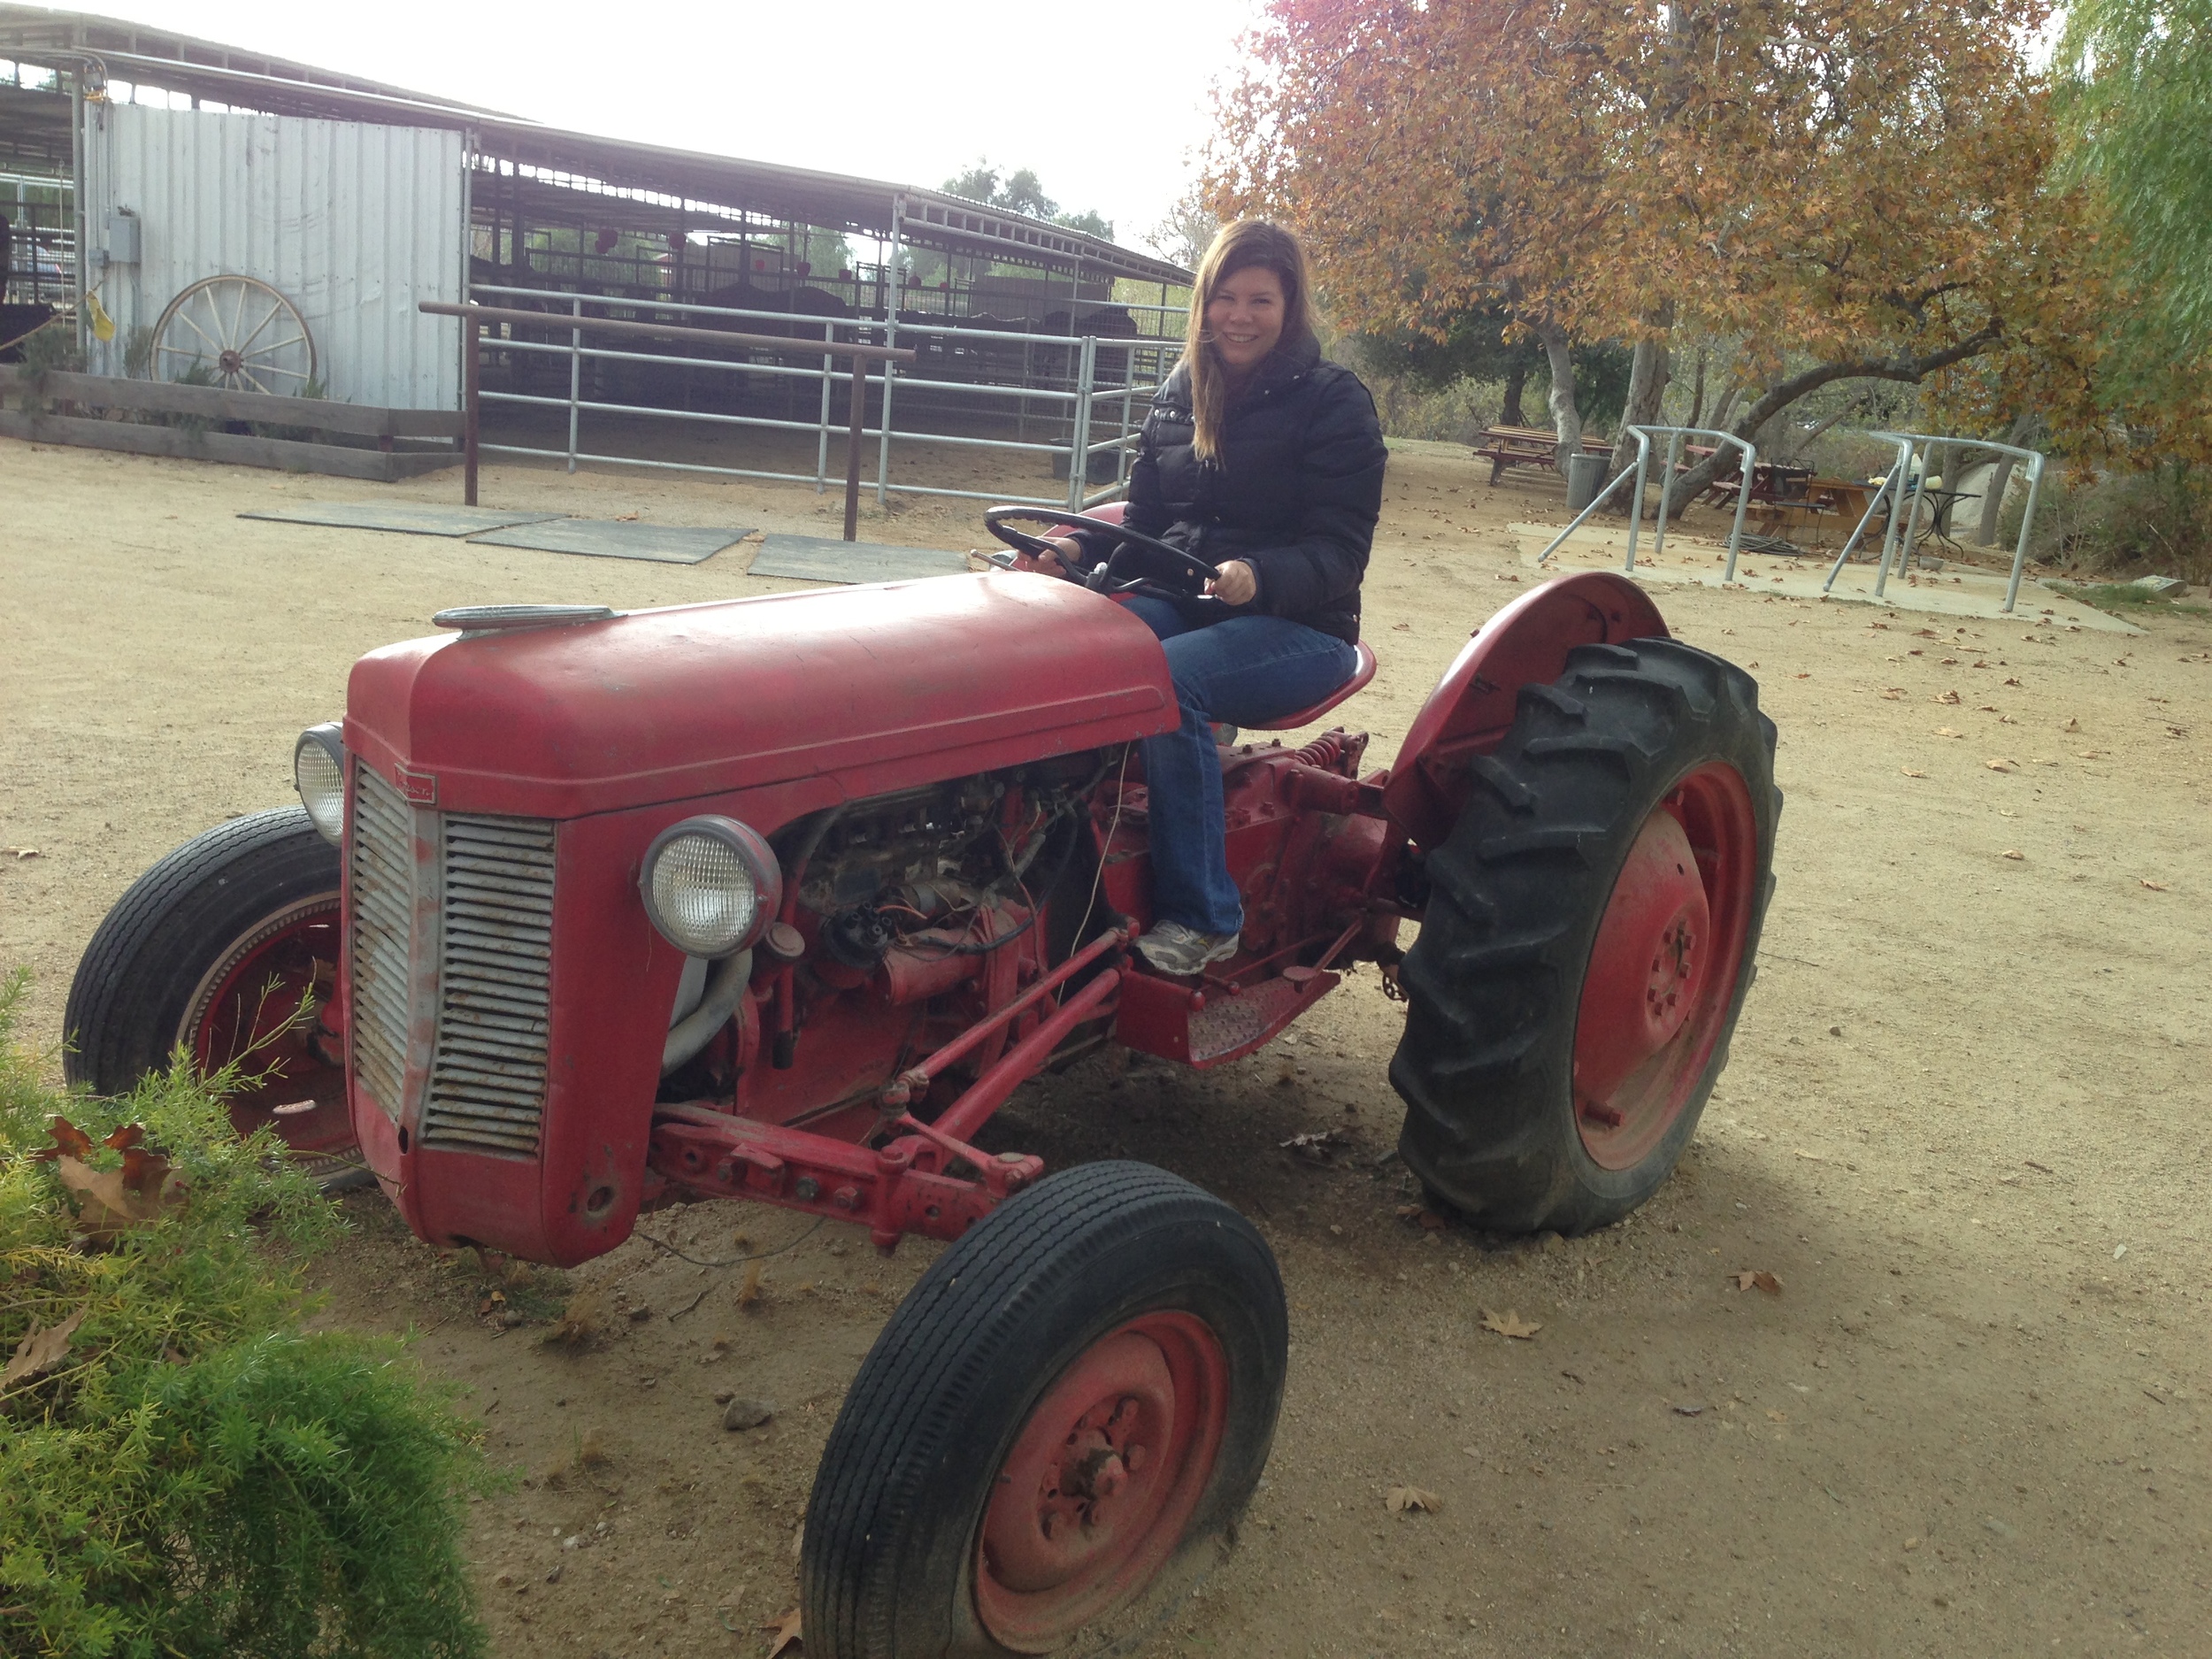  The last time that we visited, the tractor was &nbsp;over-run with kids. We jumped at the chance for a photo op. 